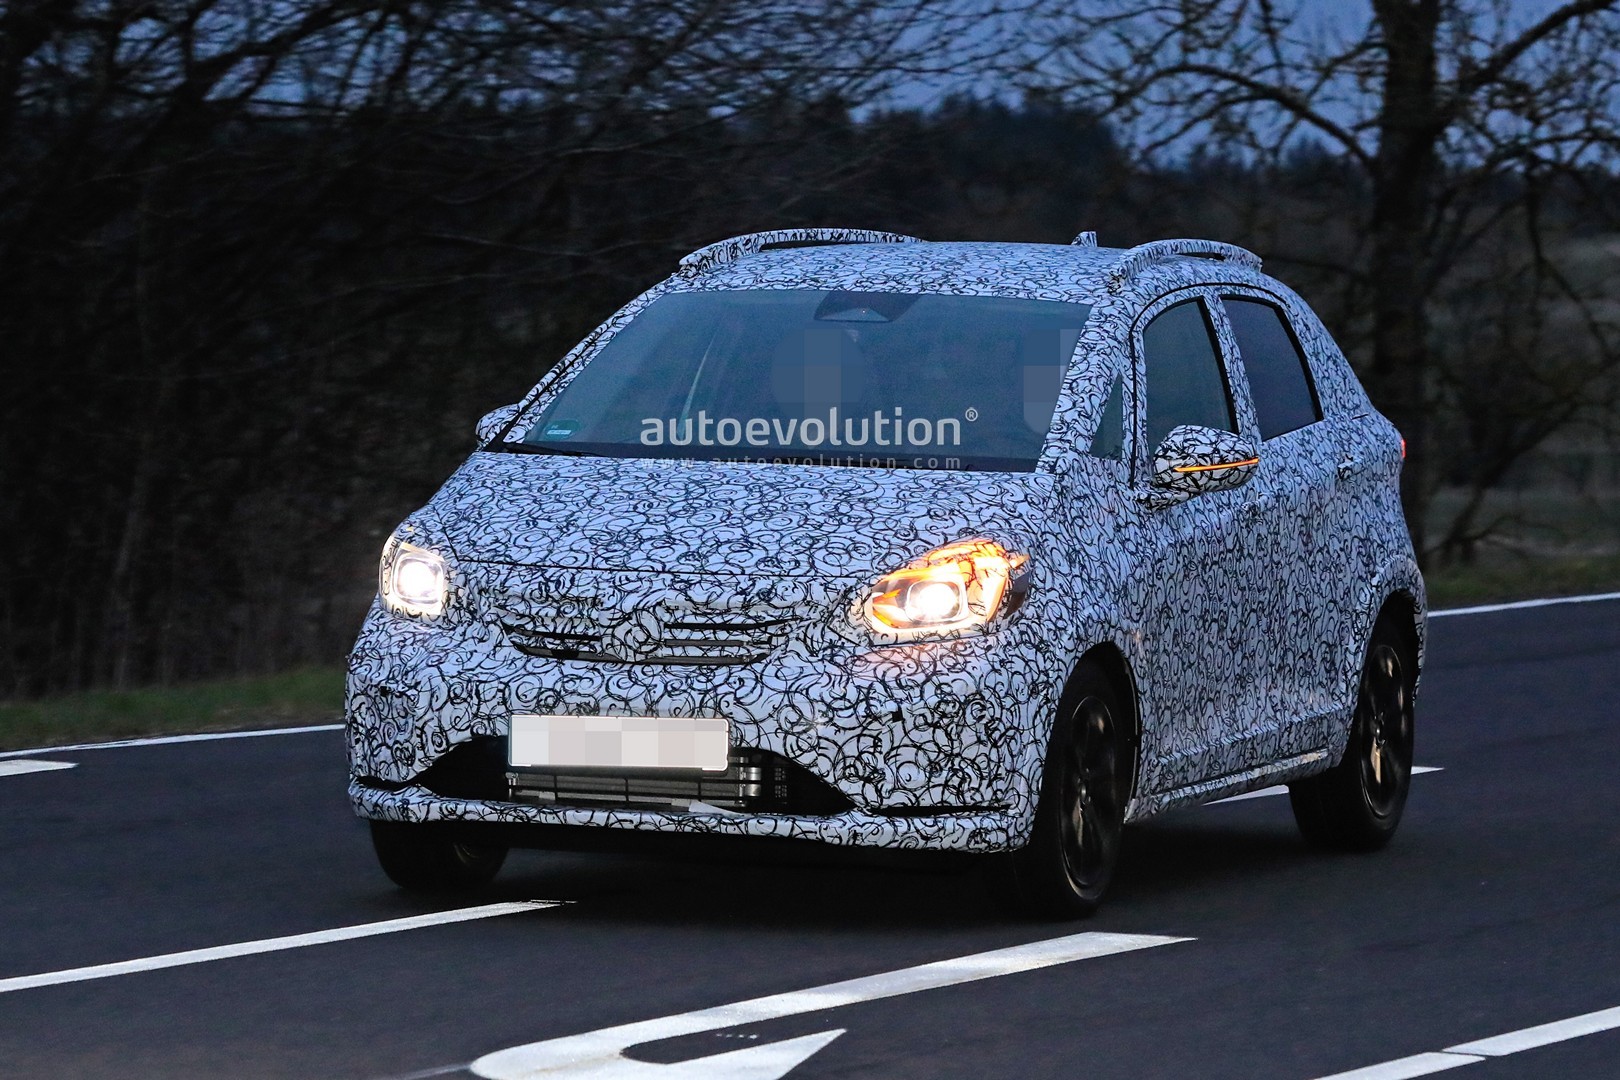 all-new-honda-jazz-fit-makes-spyshots-debut-in-europe-has-crossover-hints_1.jpg